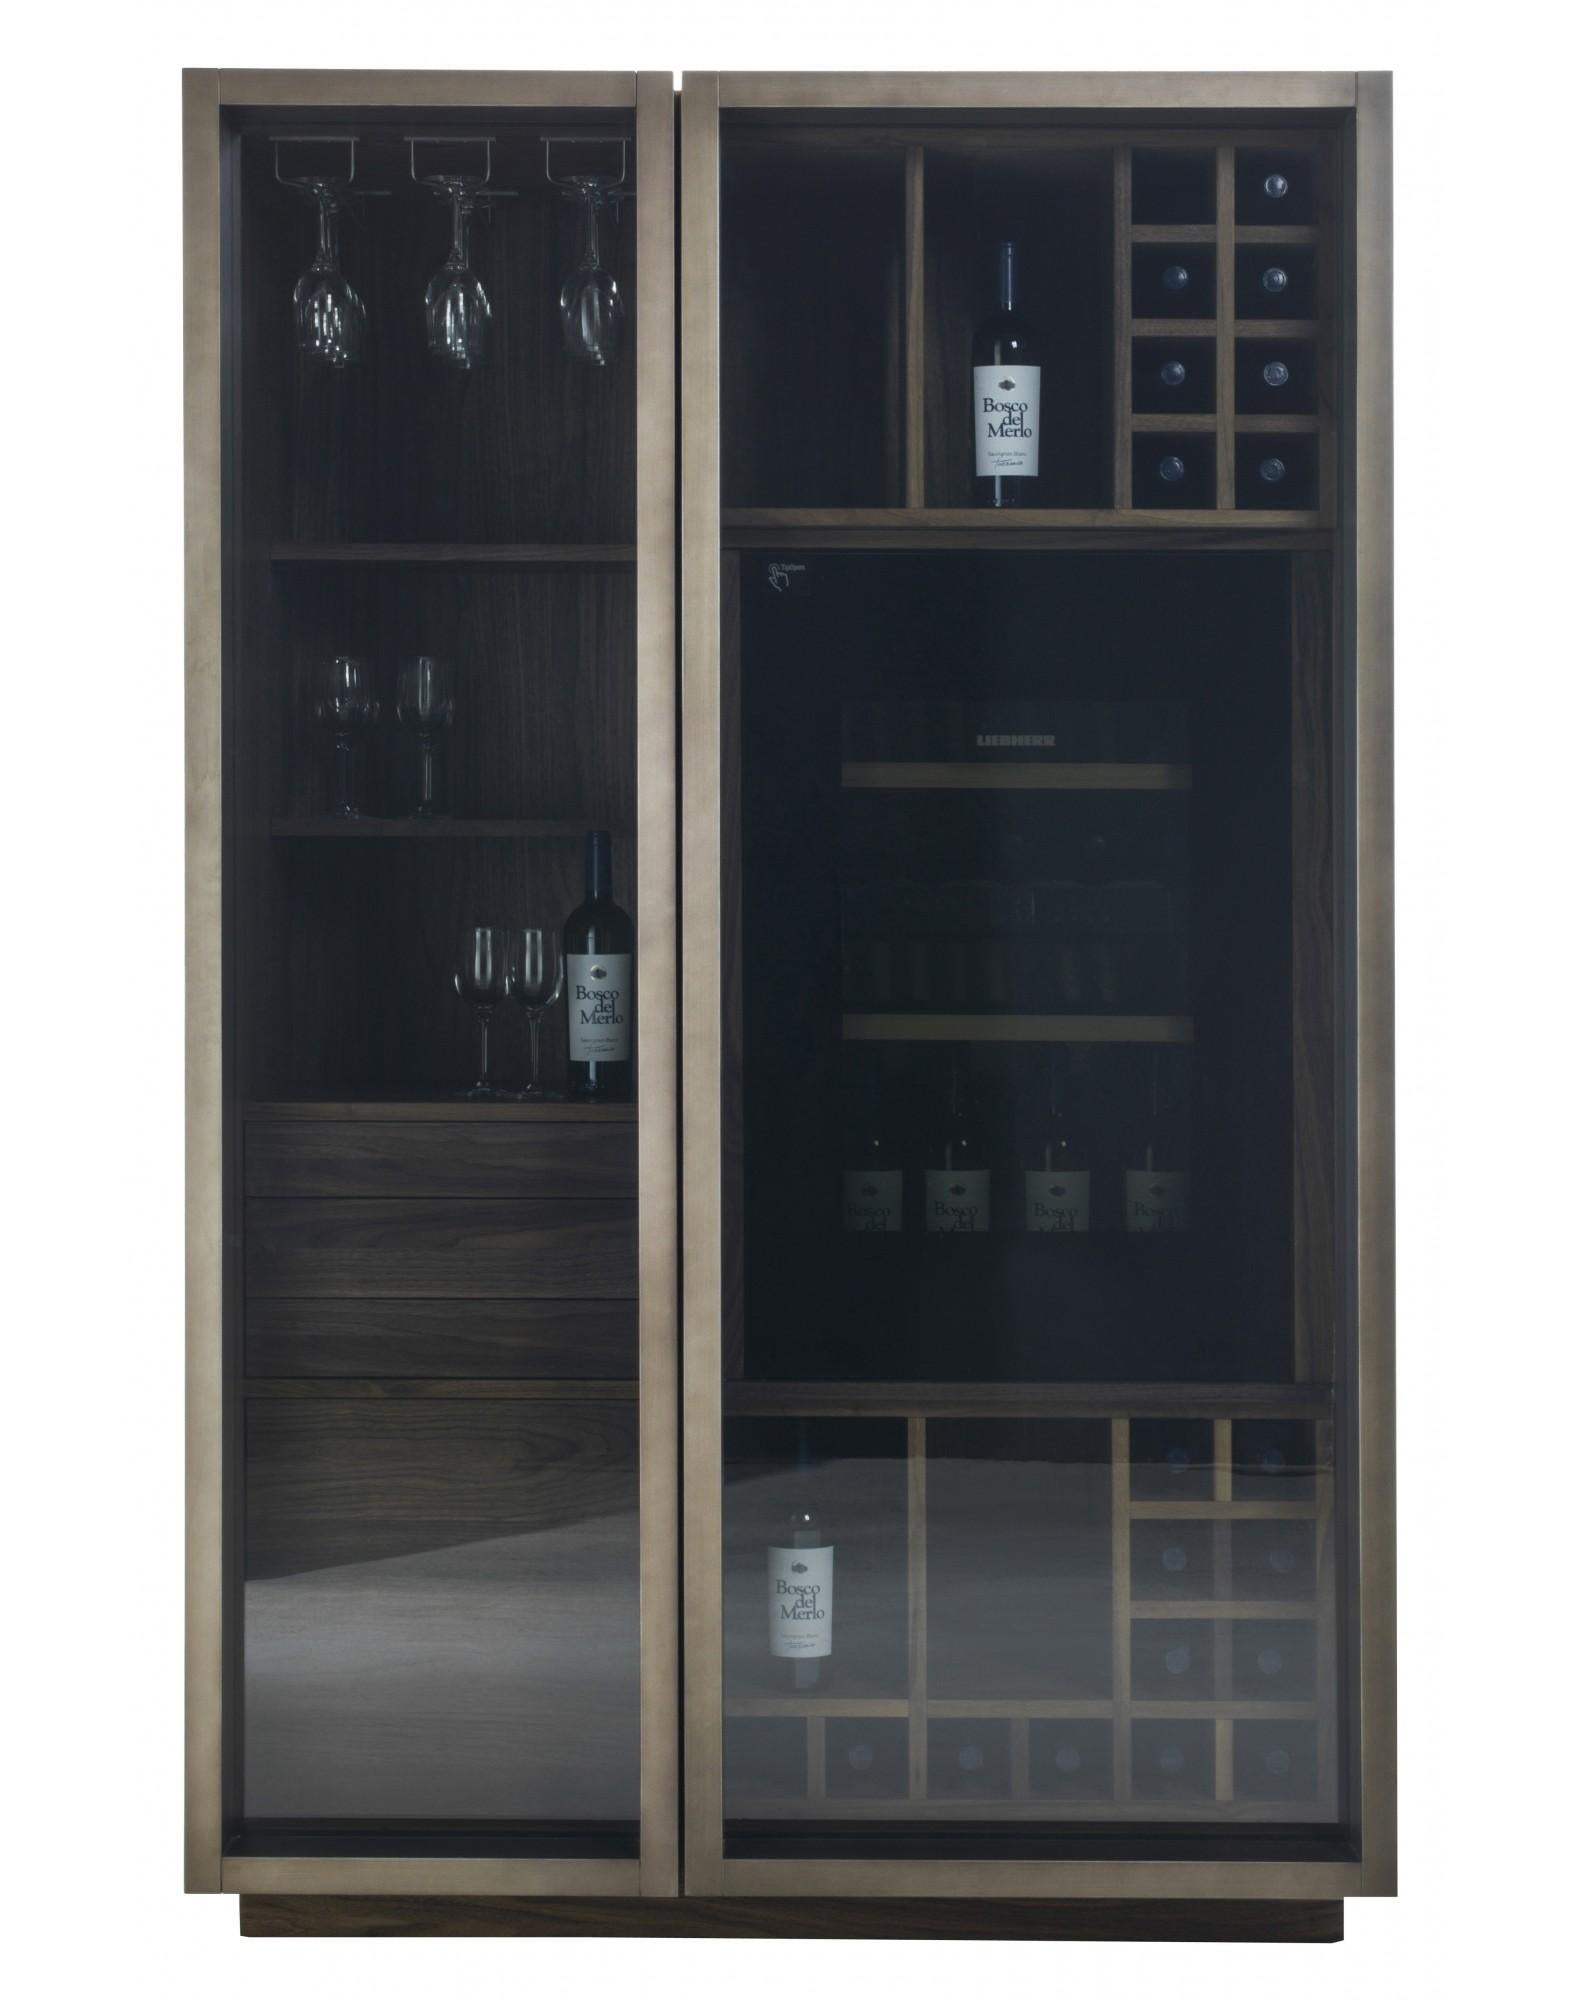 multifunctional storage unit with double glass doors, with plinth and solid wood drawers assembled with dovetails joints and solid wood push-pull opening system. 

Unit and inner structure fittings are designed to meet container and functional